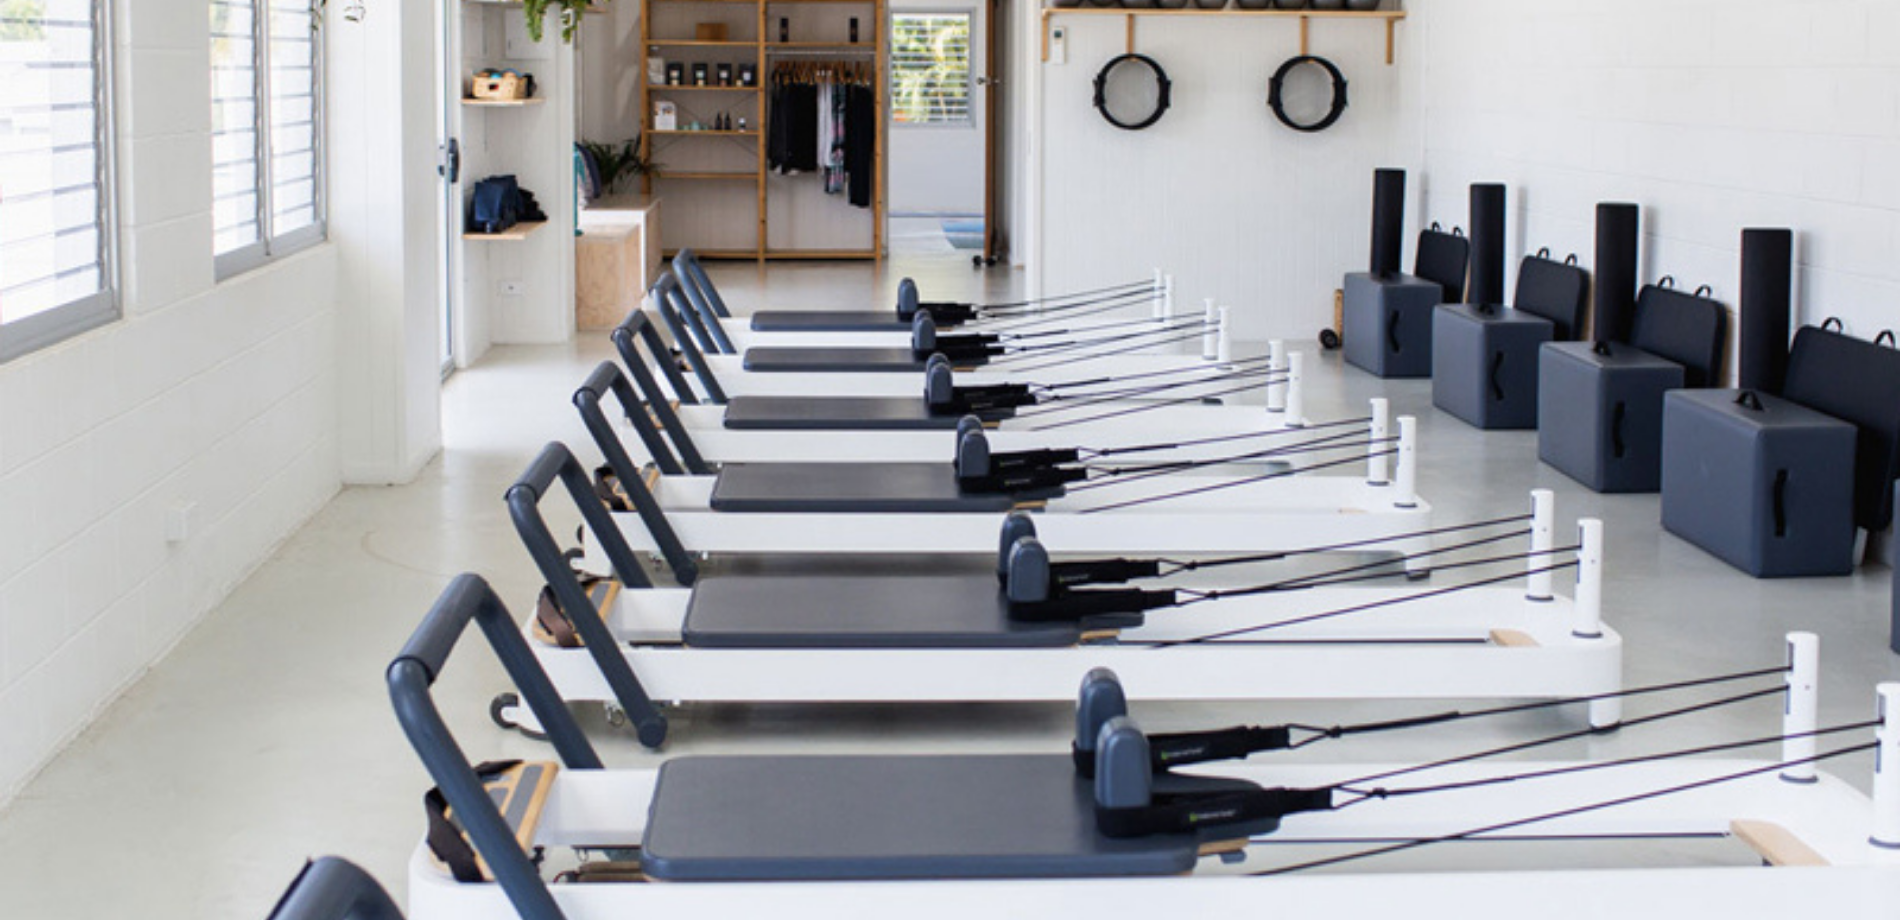 Noosa Pilates and Yoga - Accommodation in Noosa